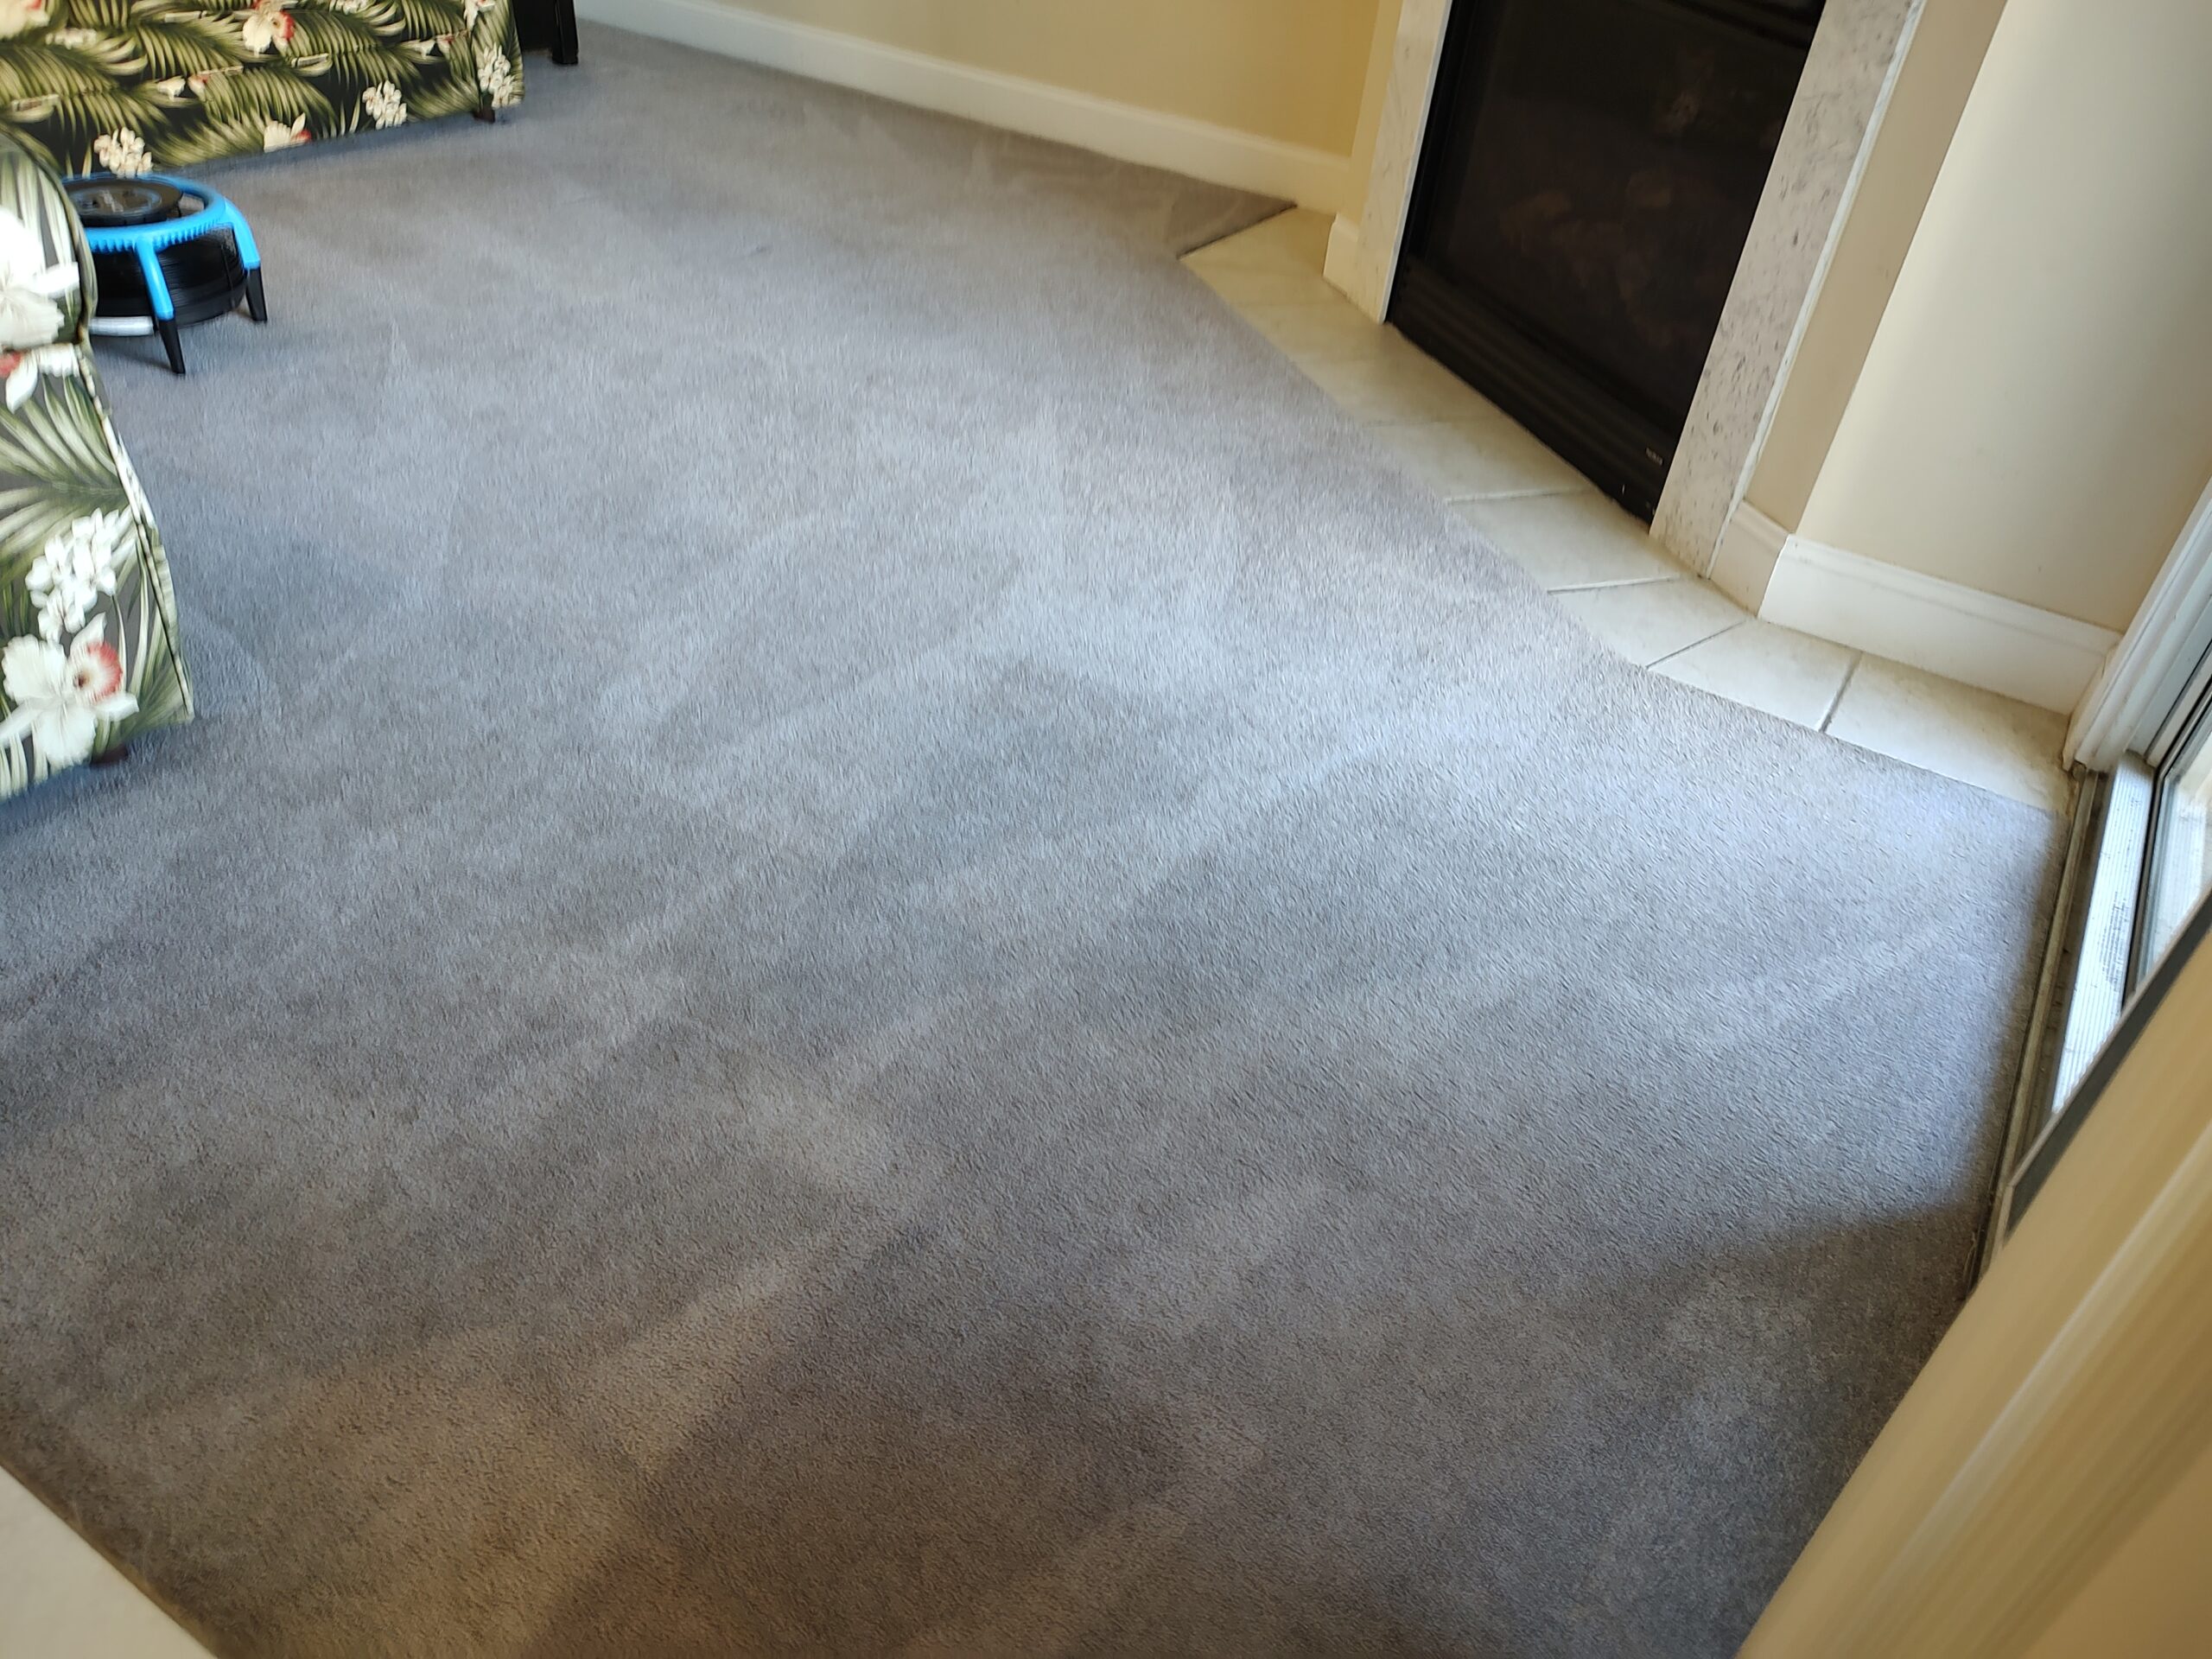 Carpets Cleaned Professionally